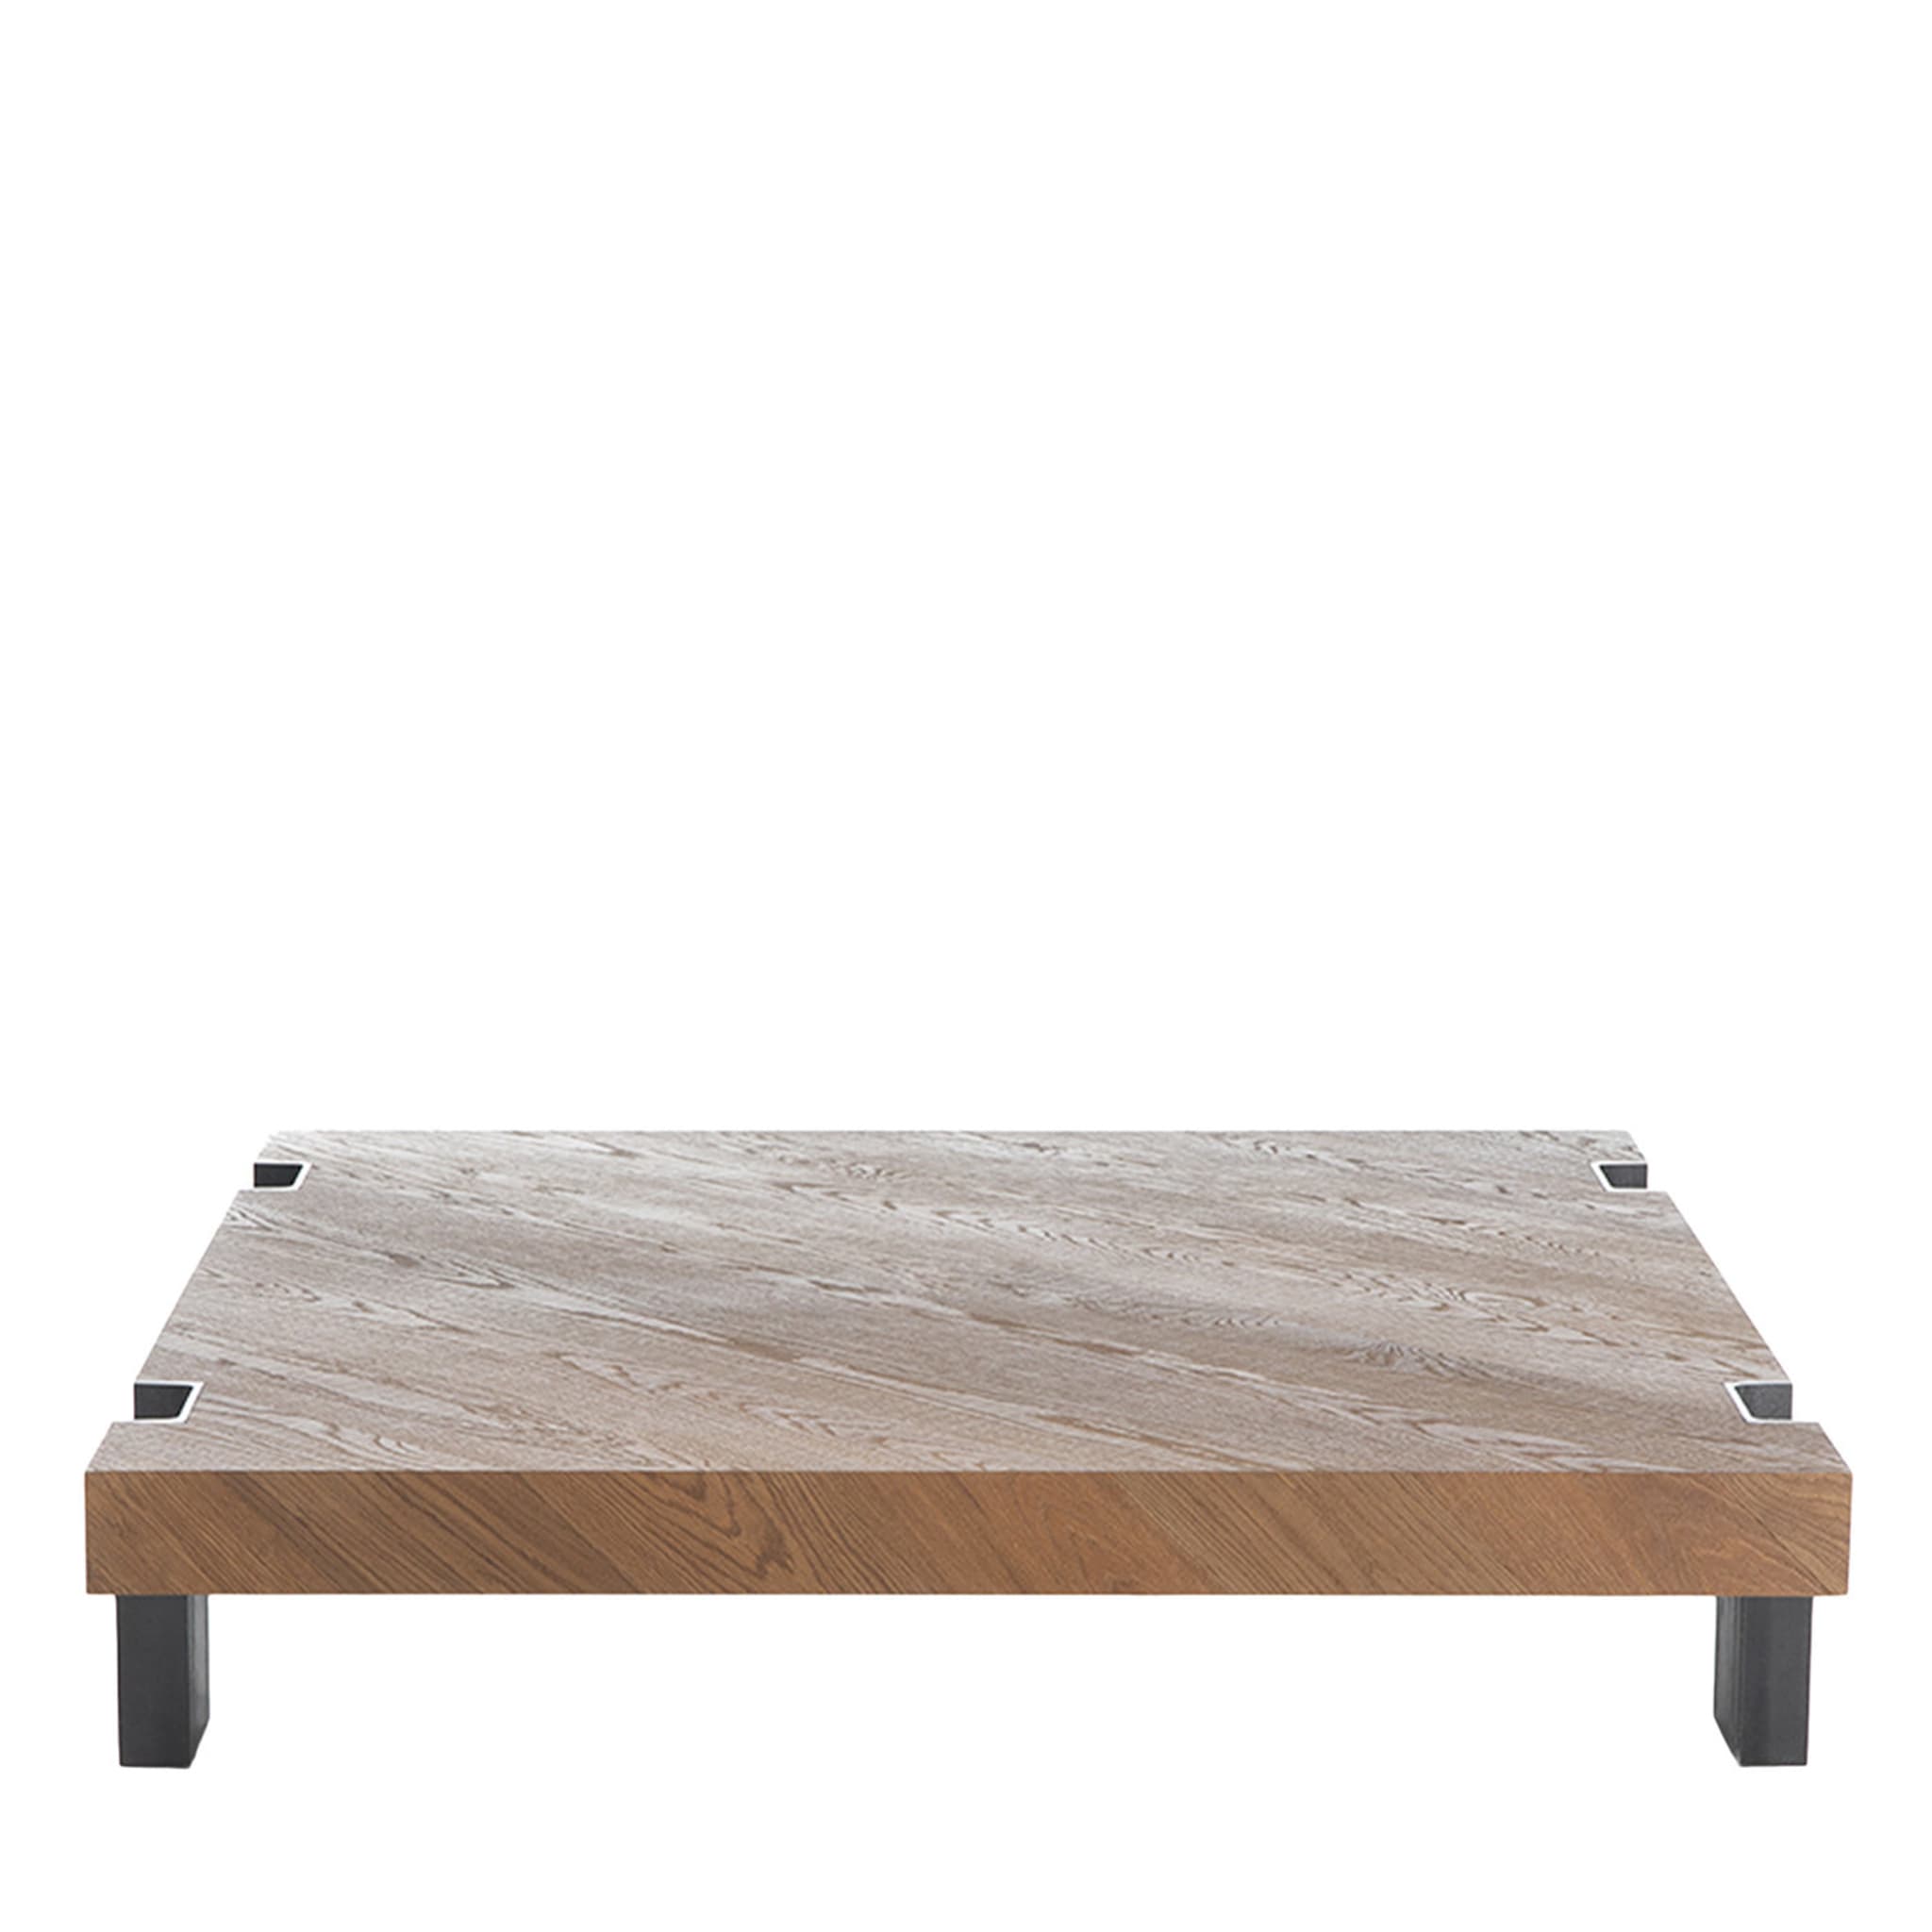 T50 Coffee Table by Jean-Michel Wilmotte - Main view